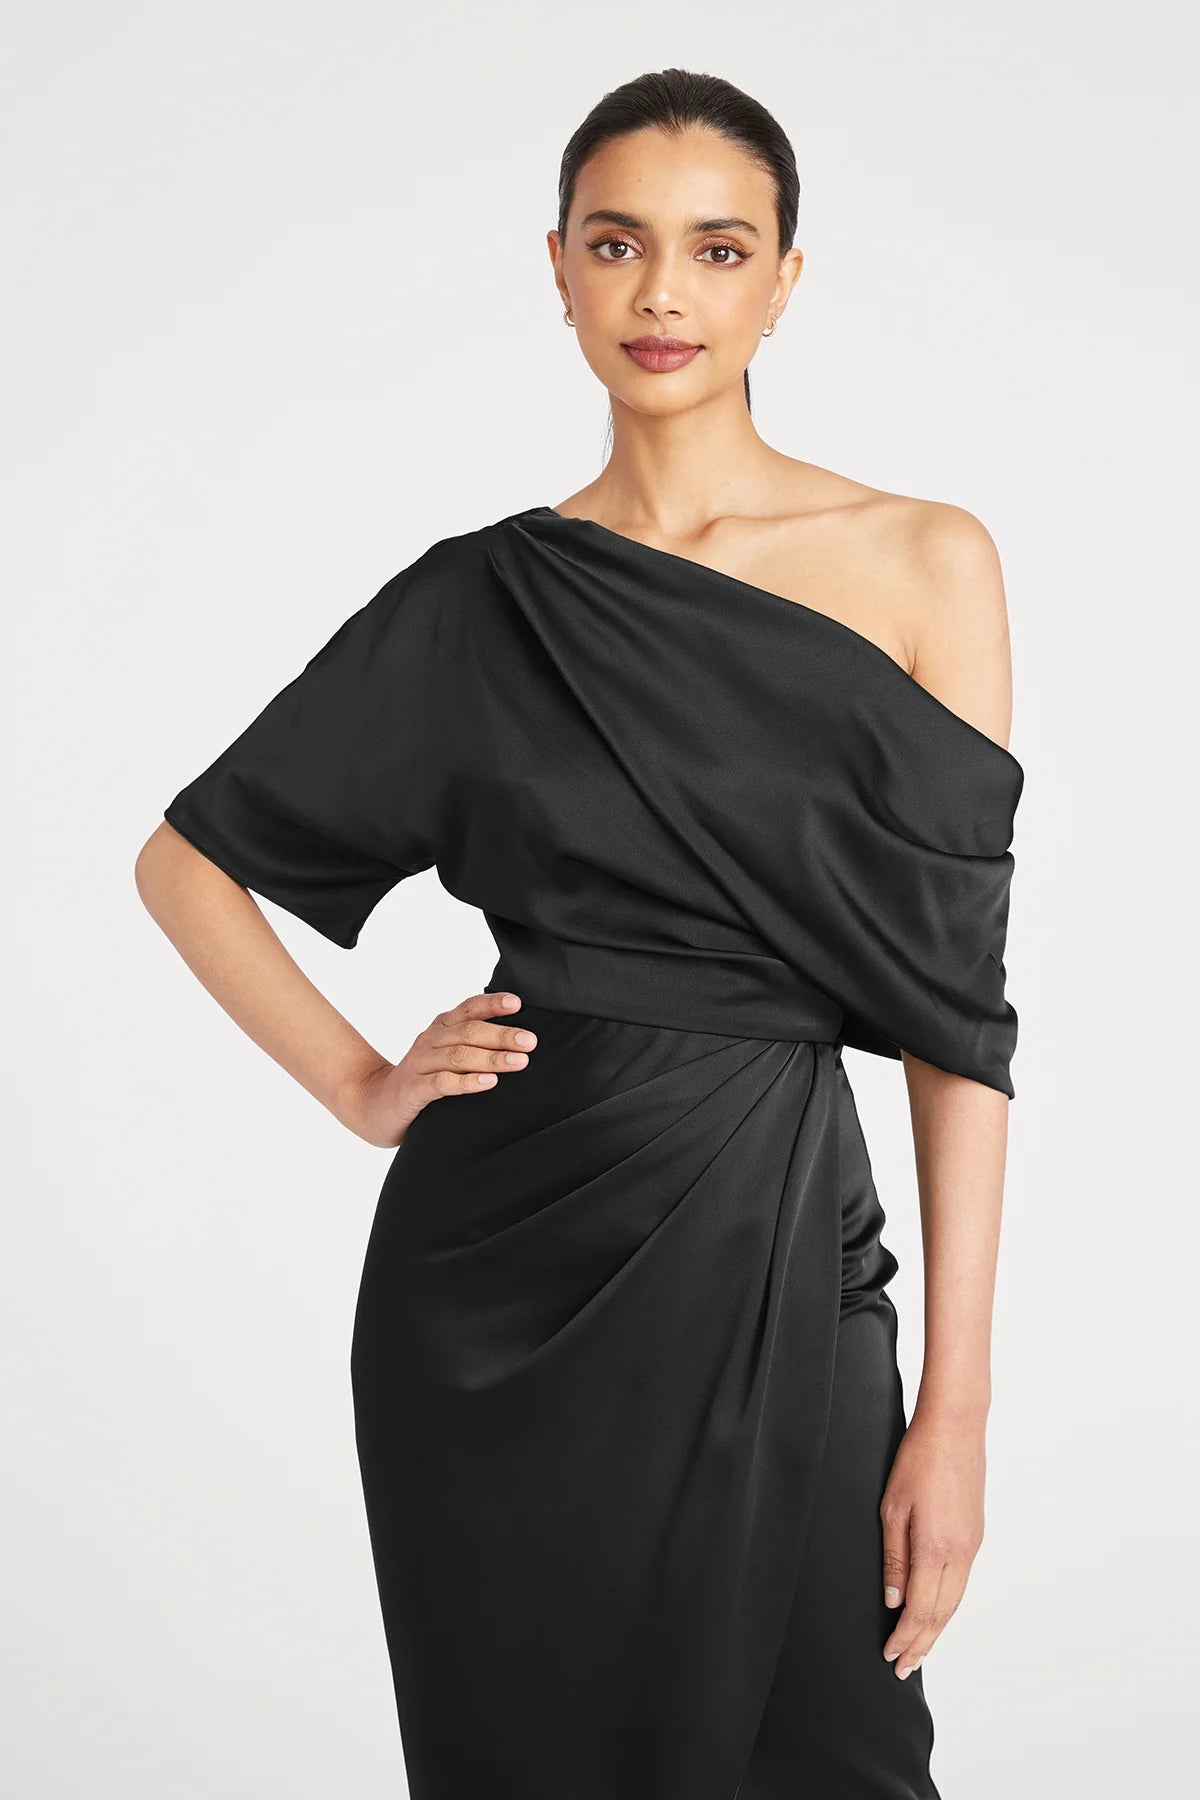 Theia 8818838 Asymmetric Tea-Length Dress in navy blue - Perfect for evening events, mothers of the bride or groom.  Model is wearing the dress in Black.